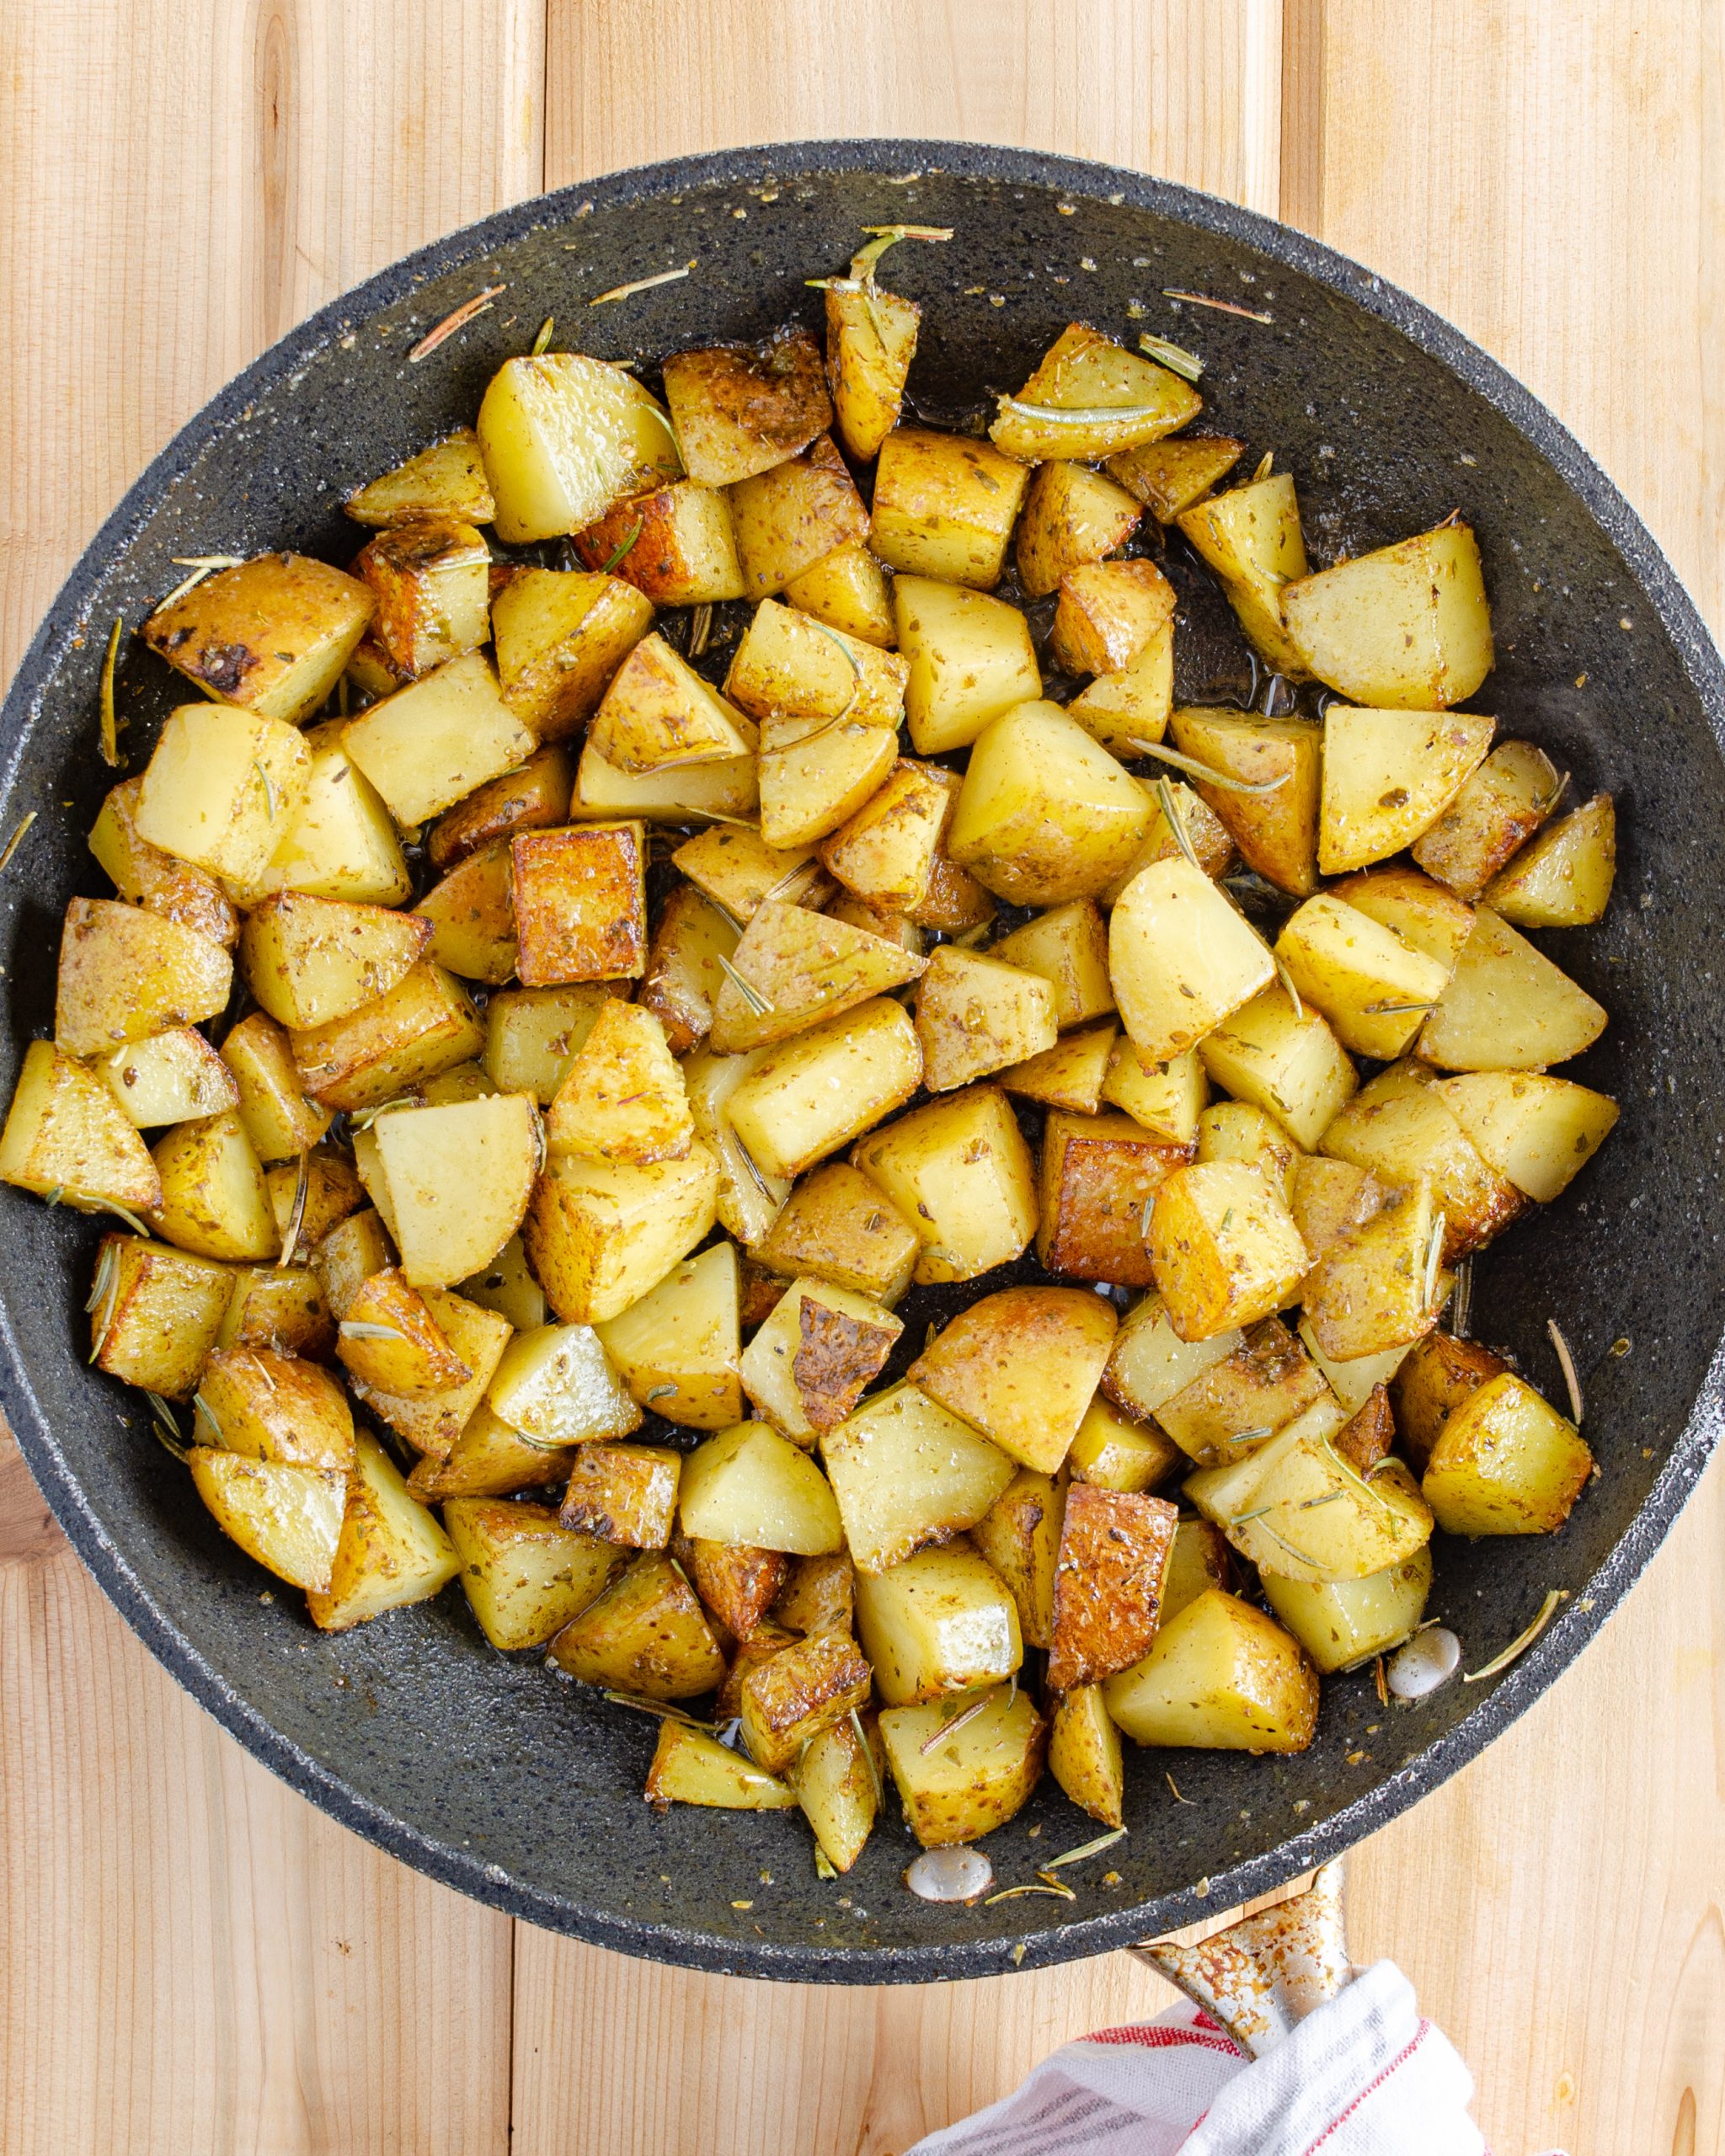 Cook the potatoes until you can easily pierce them with a fork. Then remove the potatoes and set aside.